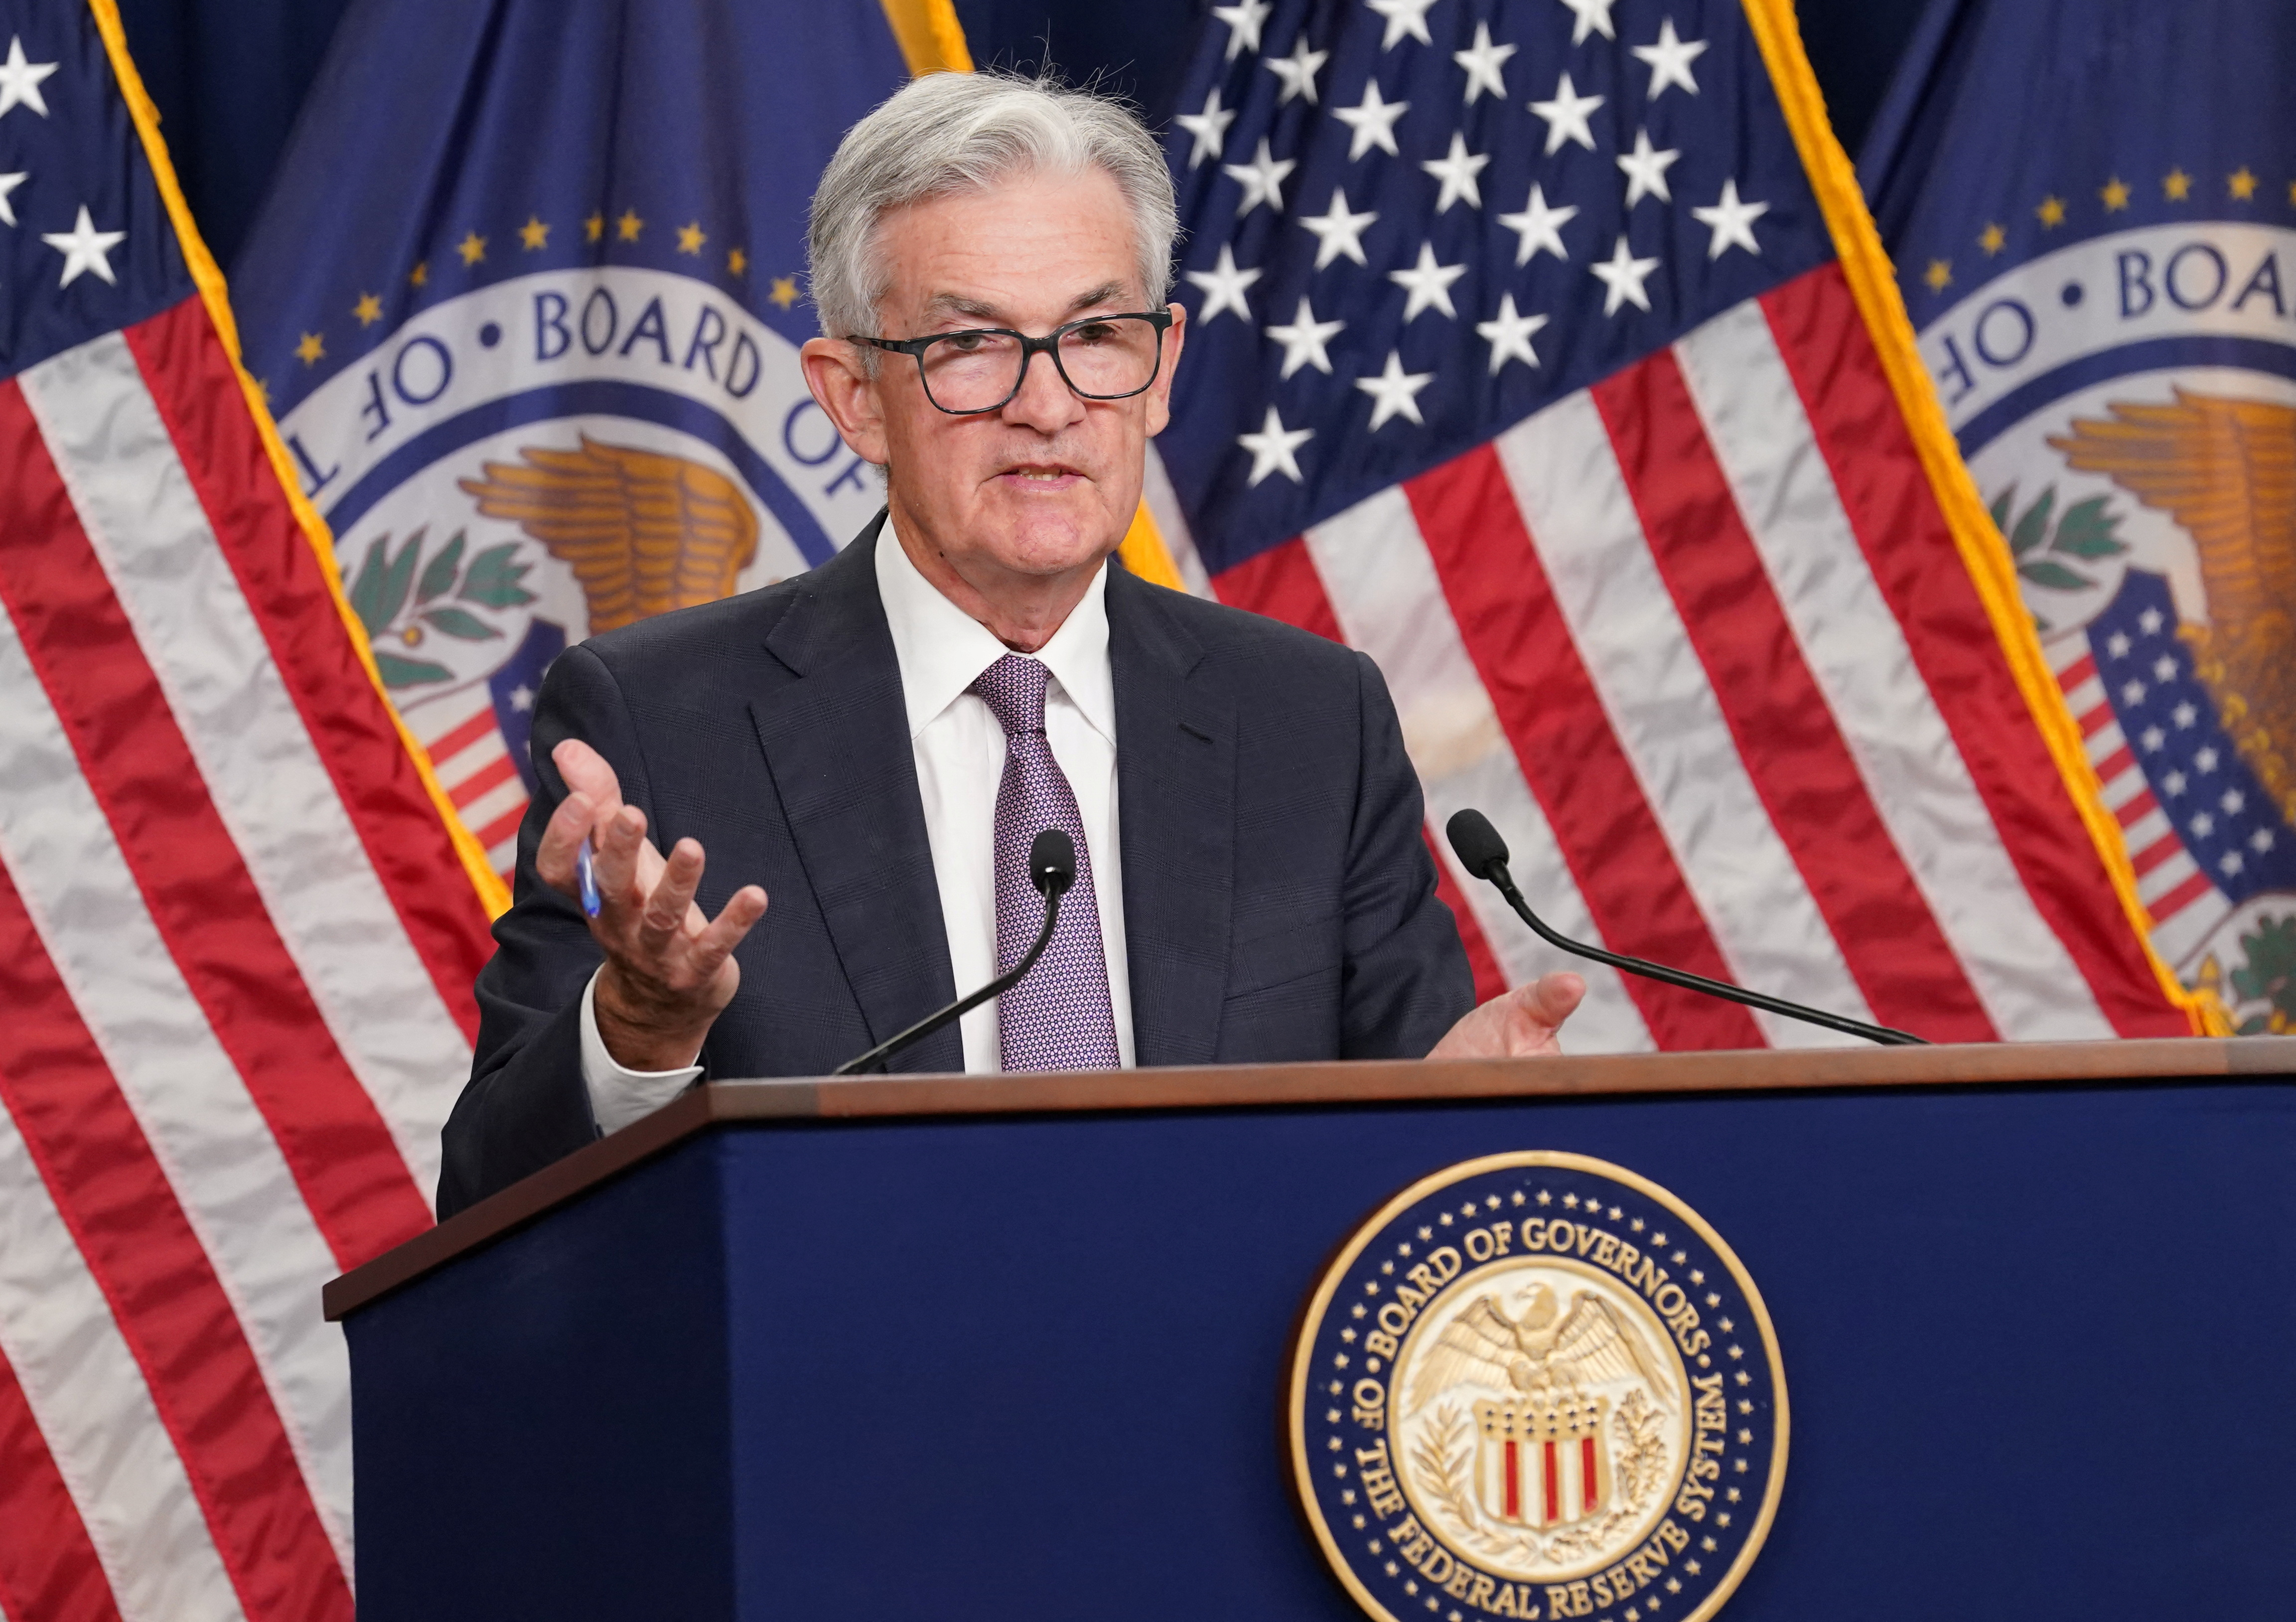 Federal Reserve chair Jerome Powell holds a news conference on today’s interest rate hike in Washington